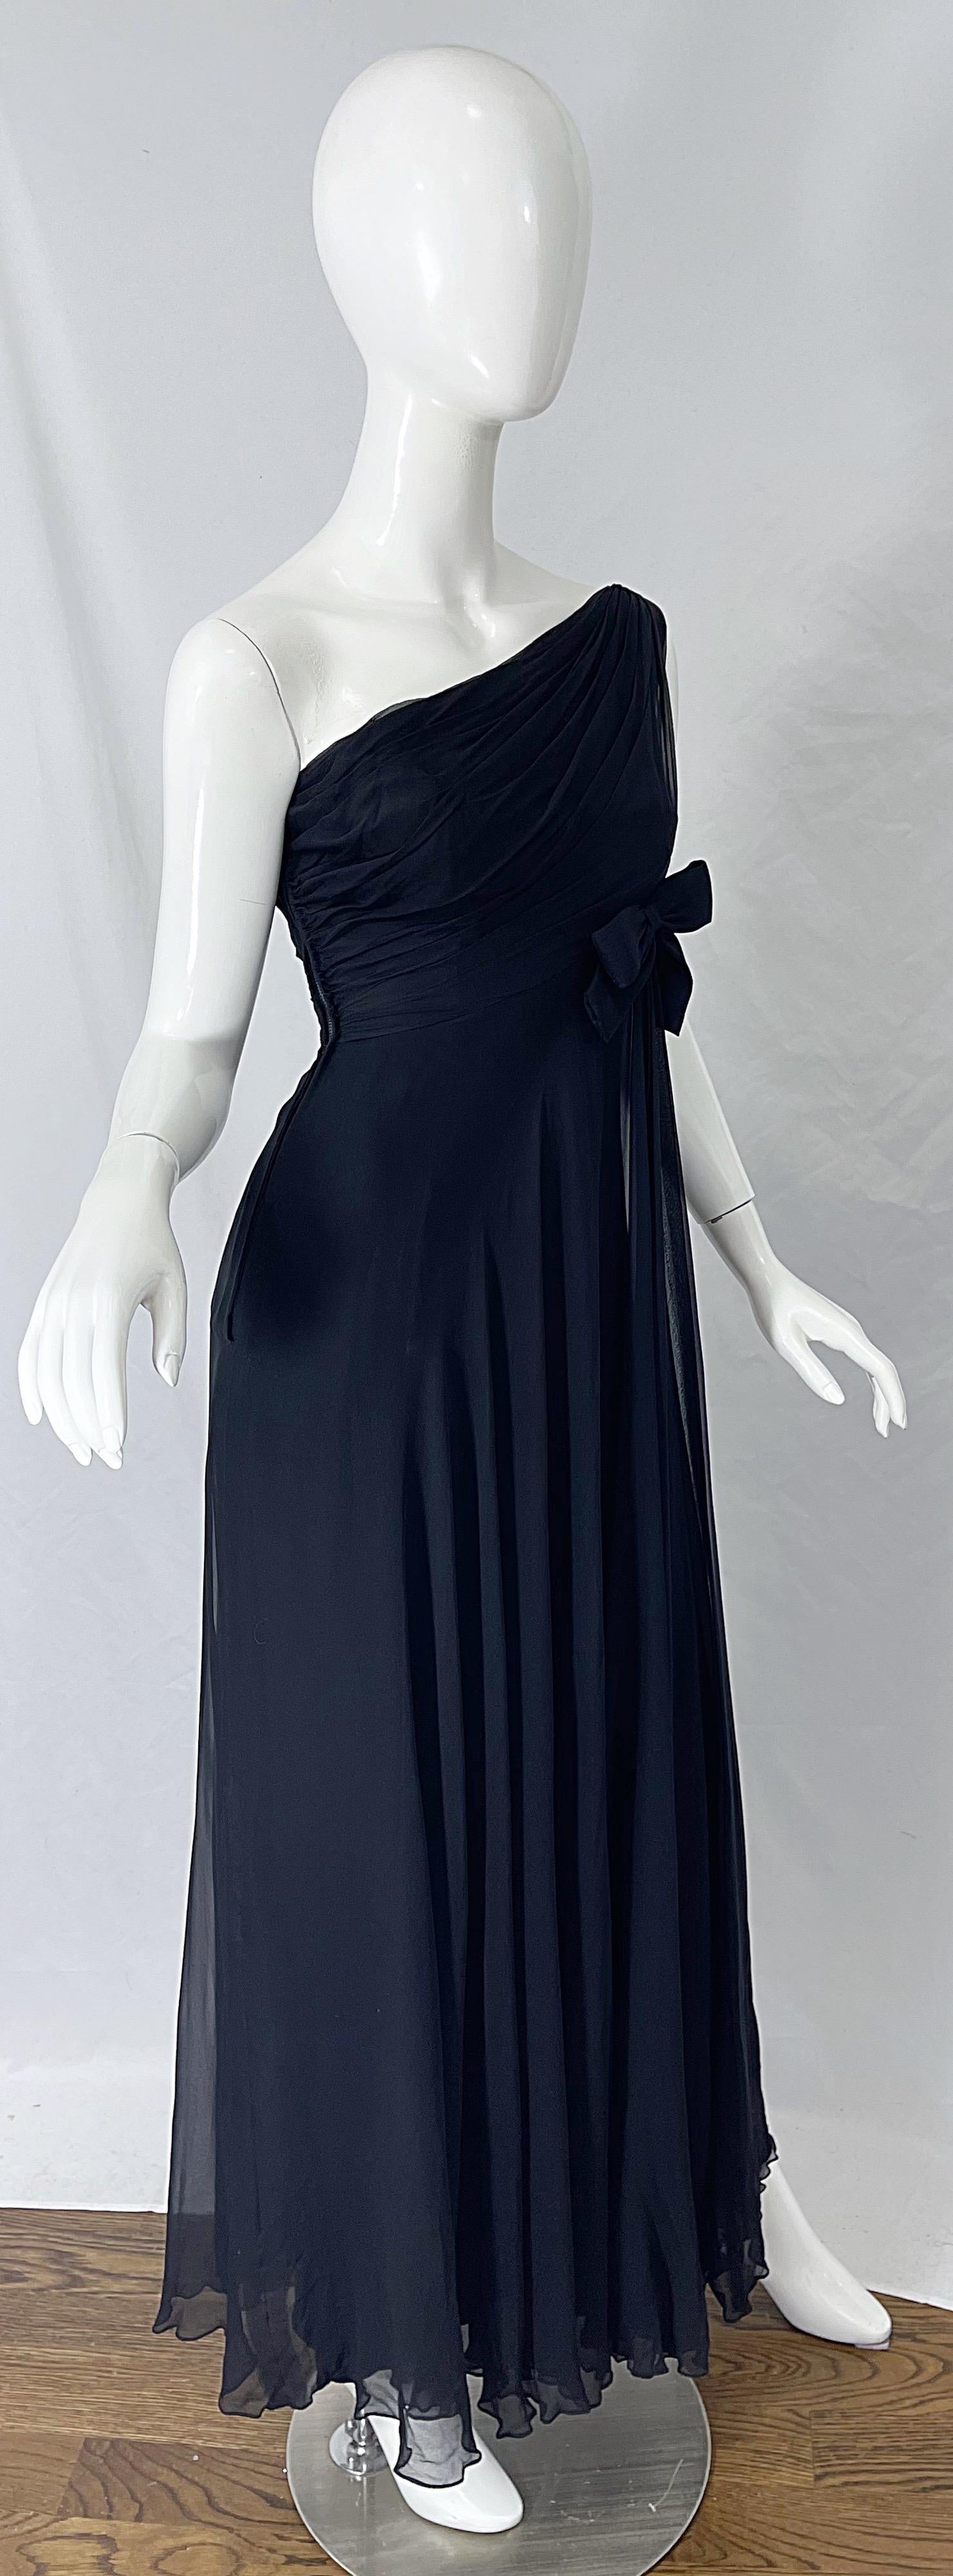 Malcolm Starr 1960s Black Silk Chiffon Grecian One Shoulder Vintage 60s Gown For Sale 6